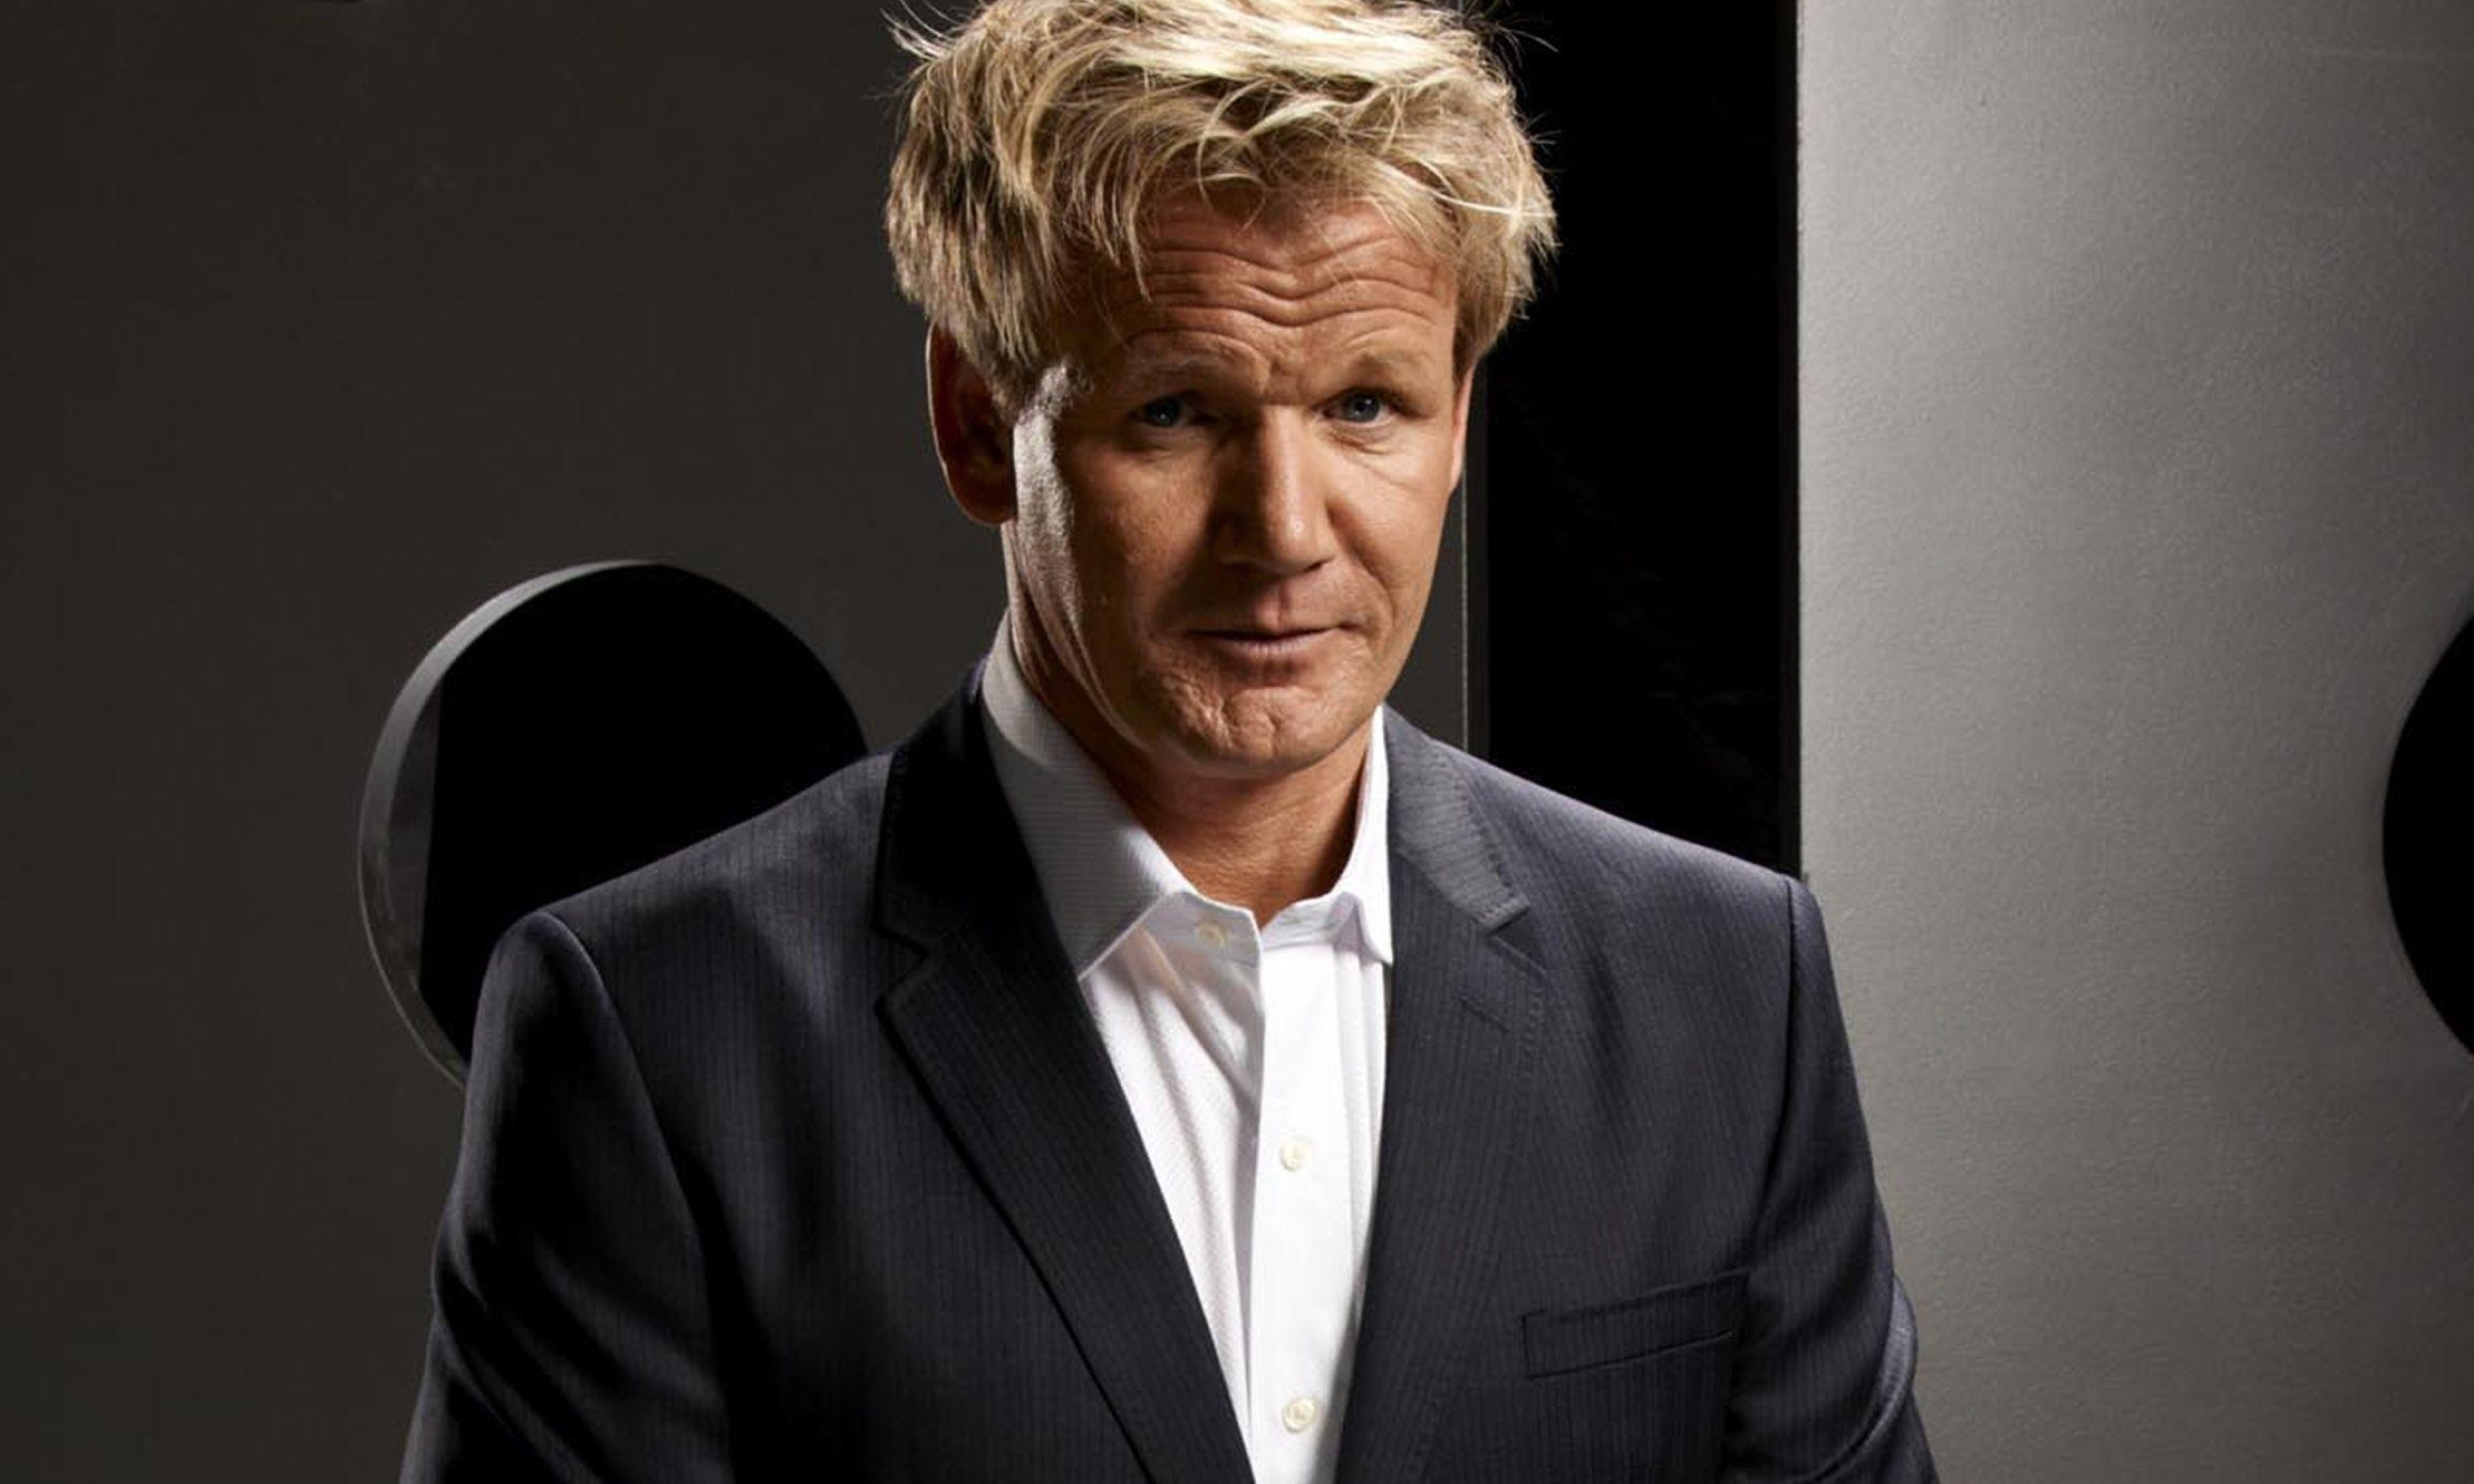 Gordon Ramsay: Known for the bluntness, fiery temper, strict demeanour, and frequent use of profanity. 2560x1540 HD Wallpaper.